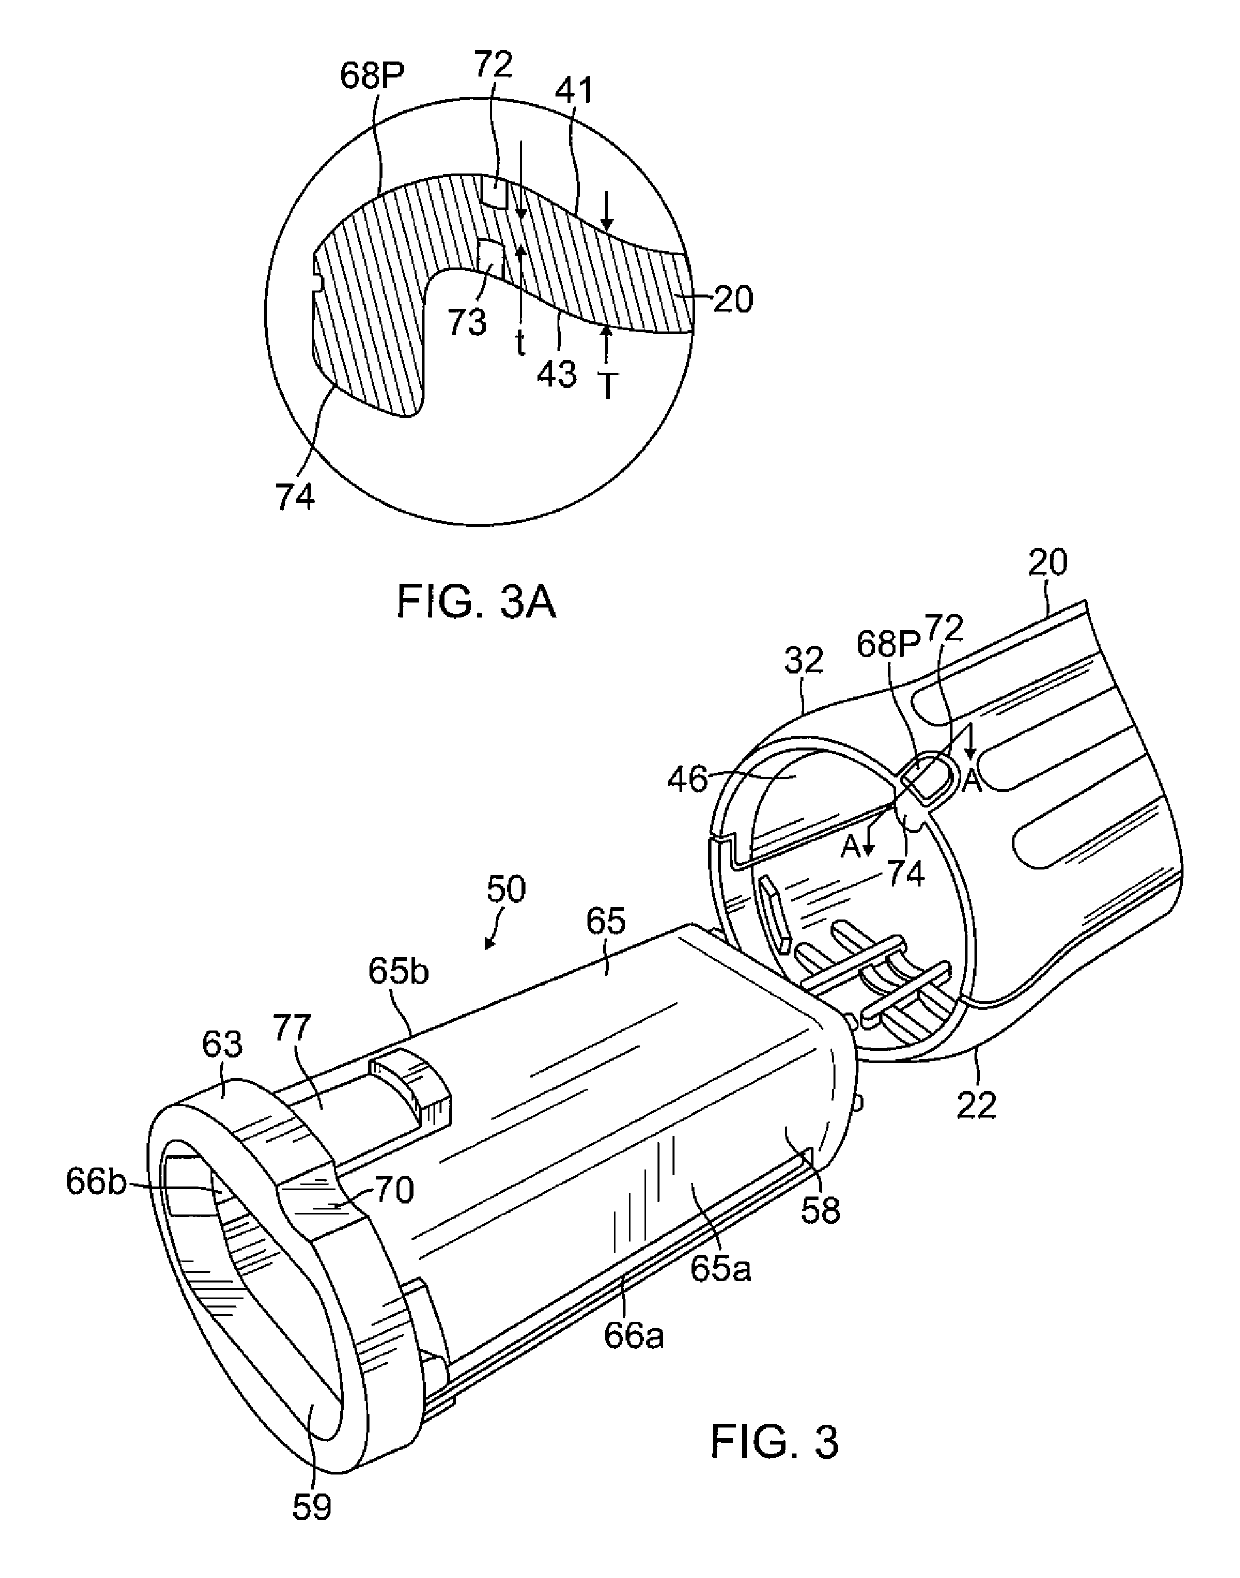 Configurable control handle for catheters and other surgical tool